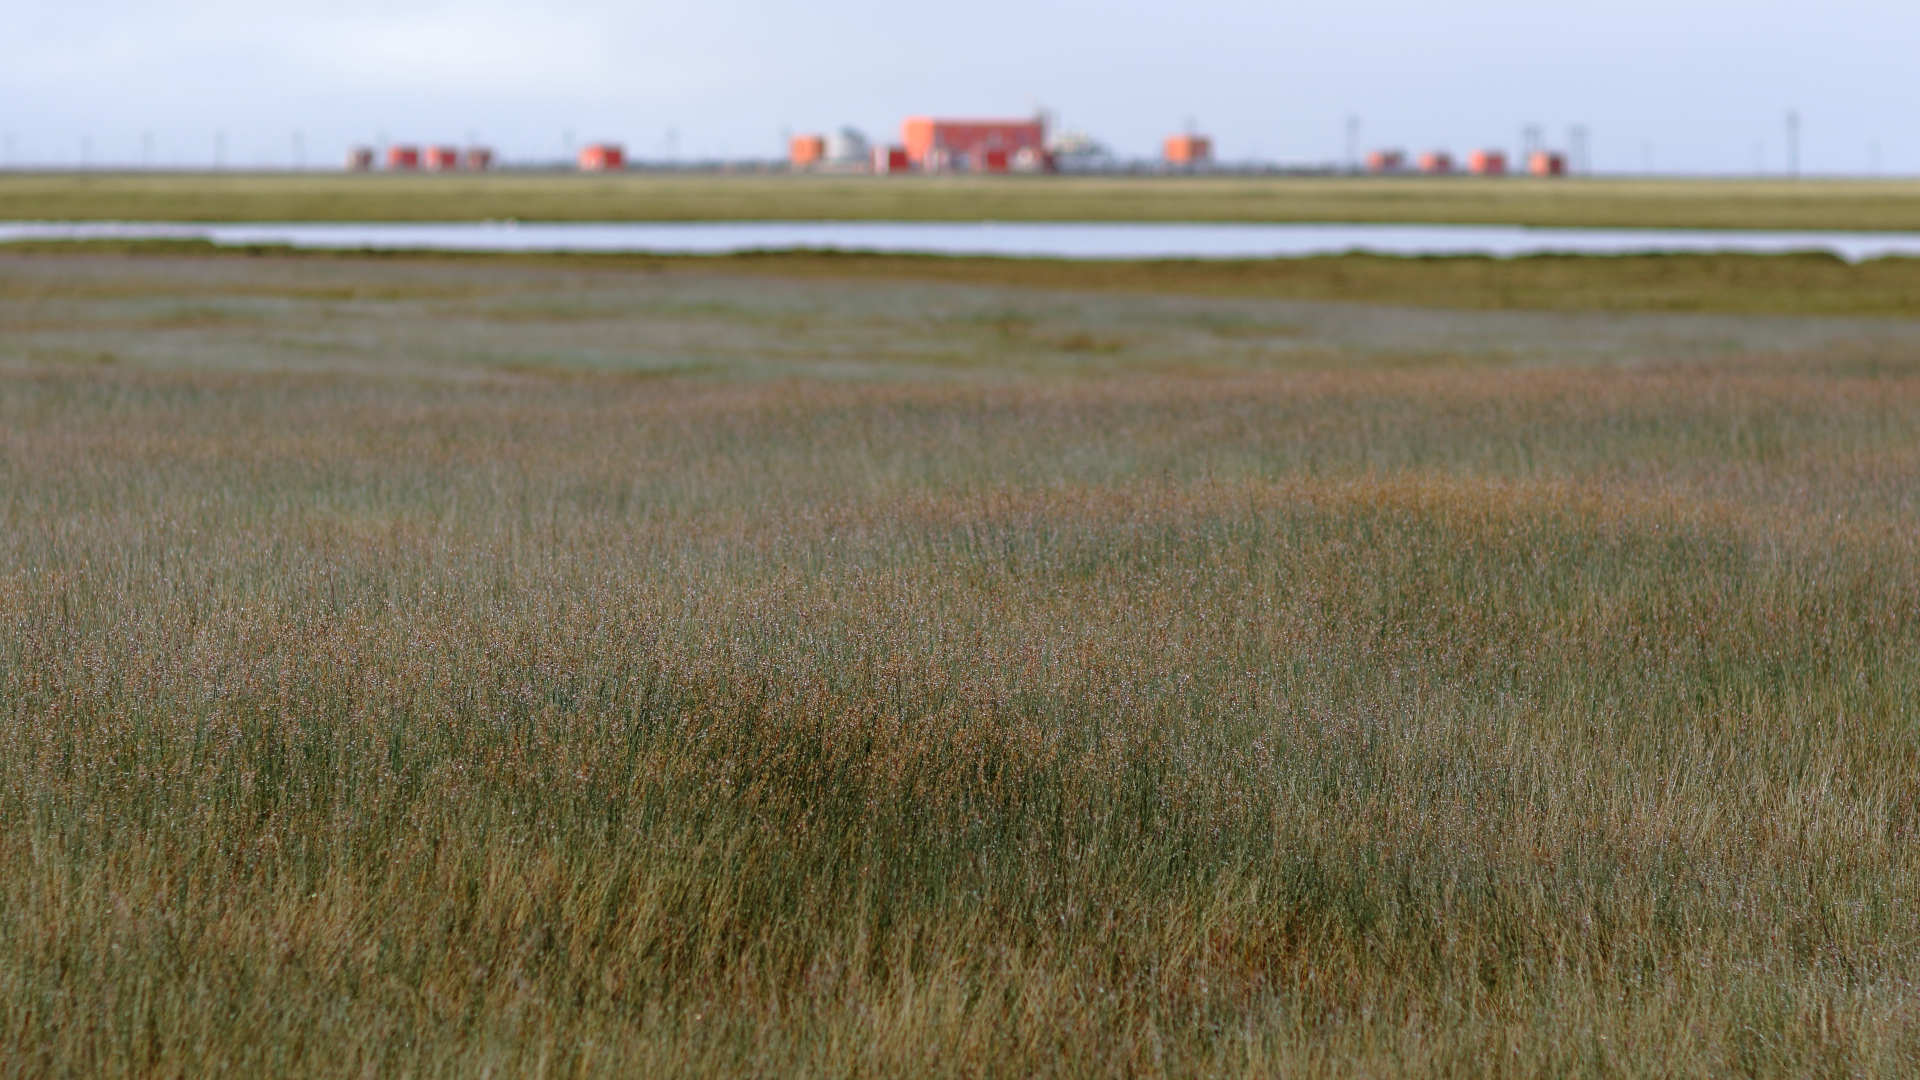 A rehabilitated drill pad (foreground) with an active pad (background). The revegetated plant community is almost exclusively grass, which differs from the original tundra system.